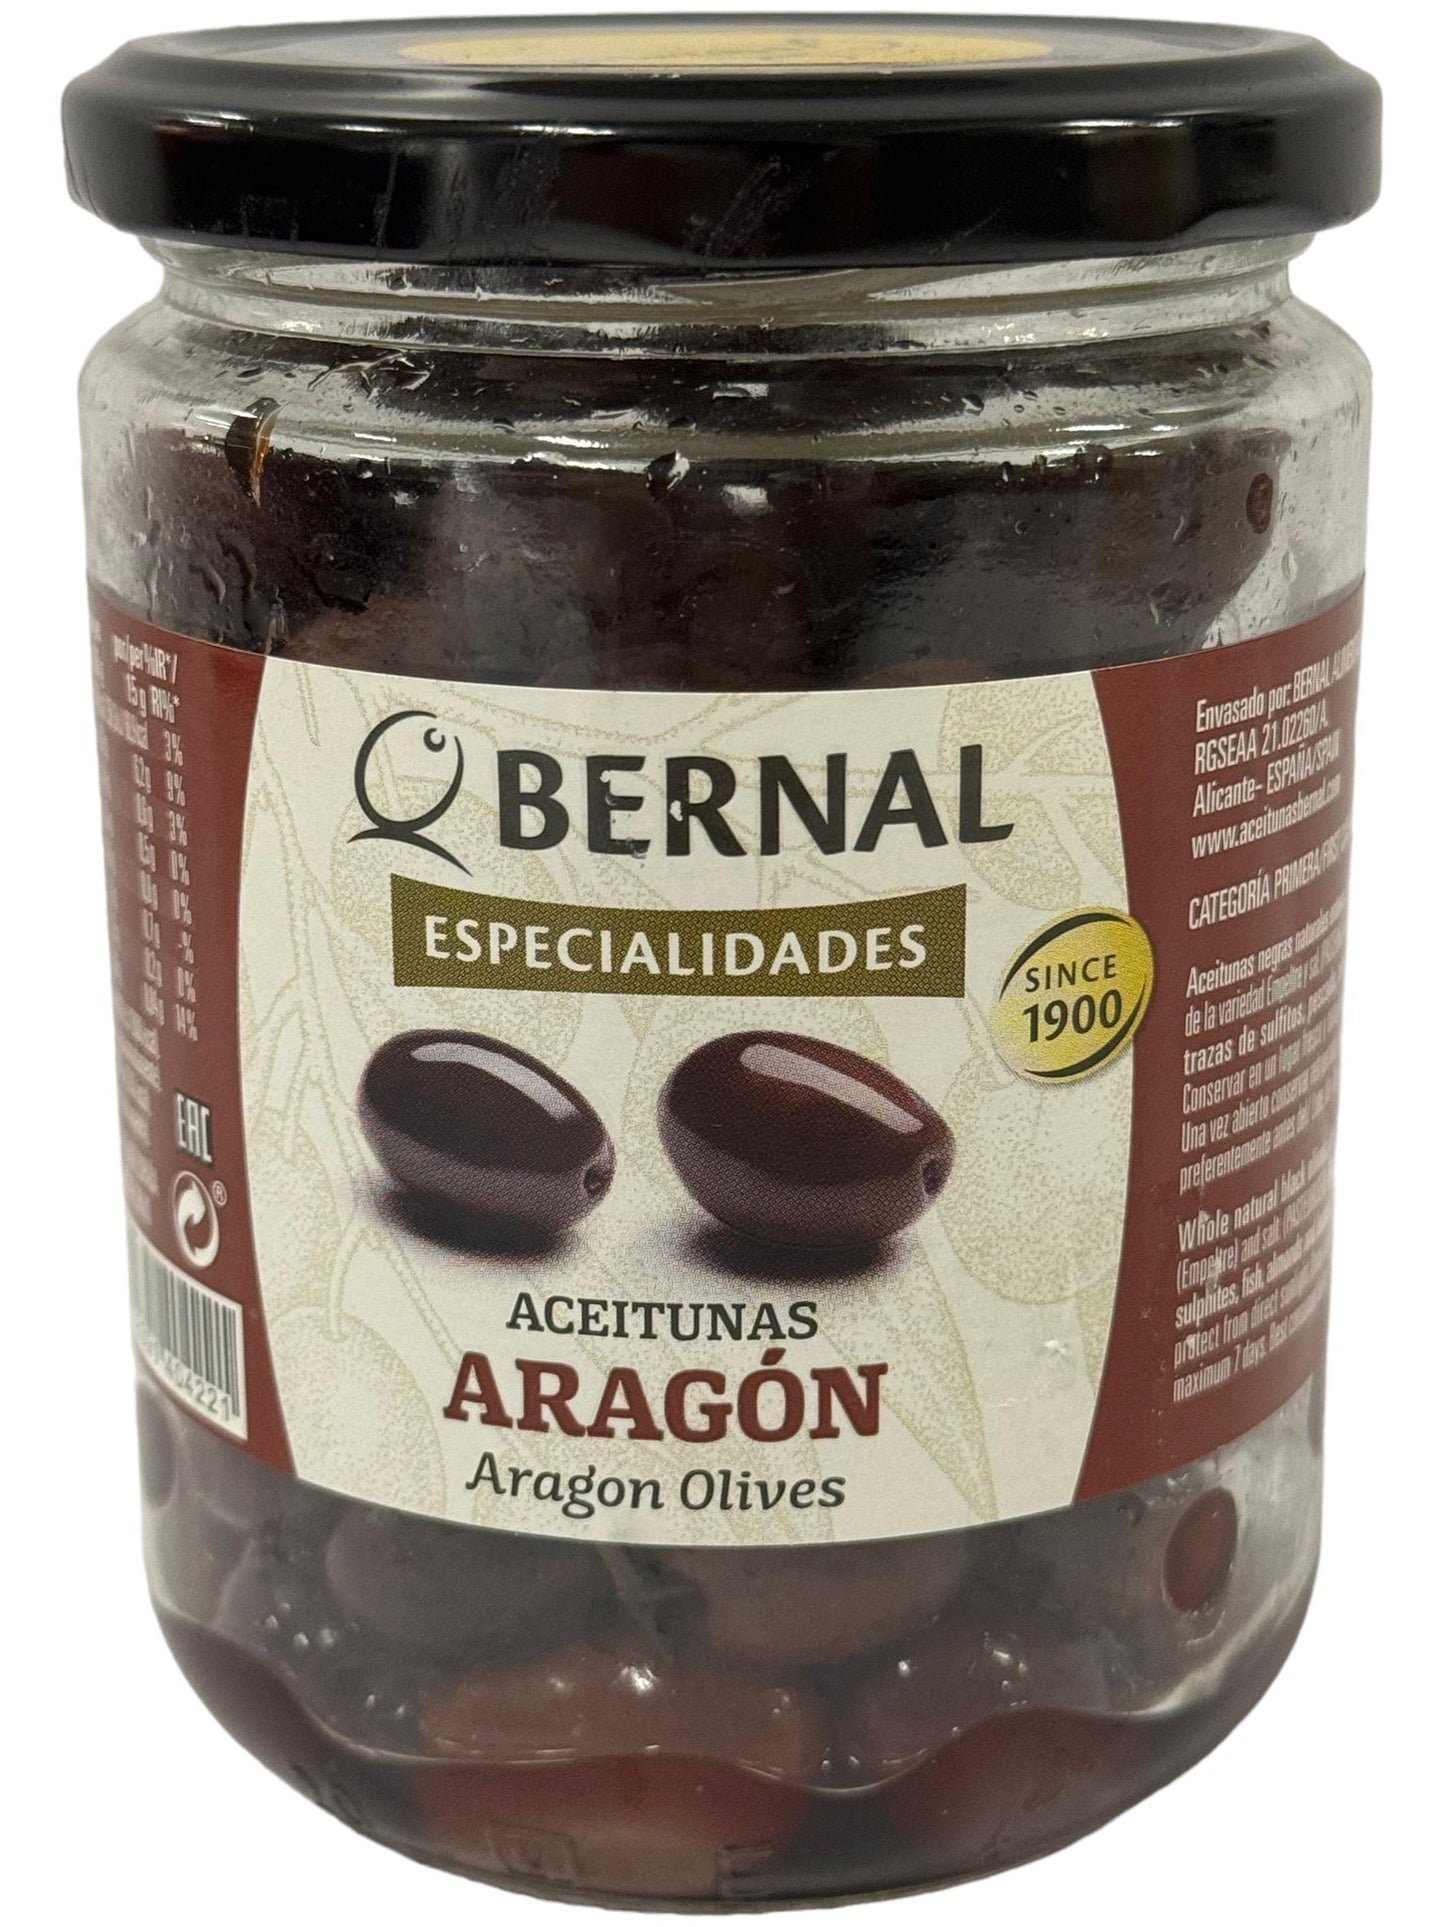 Bernal Especialades Aceitunas Aragon Olives 250g Best Before End of April 2025